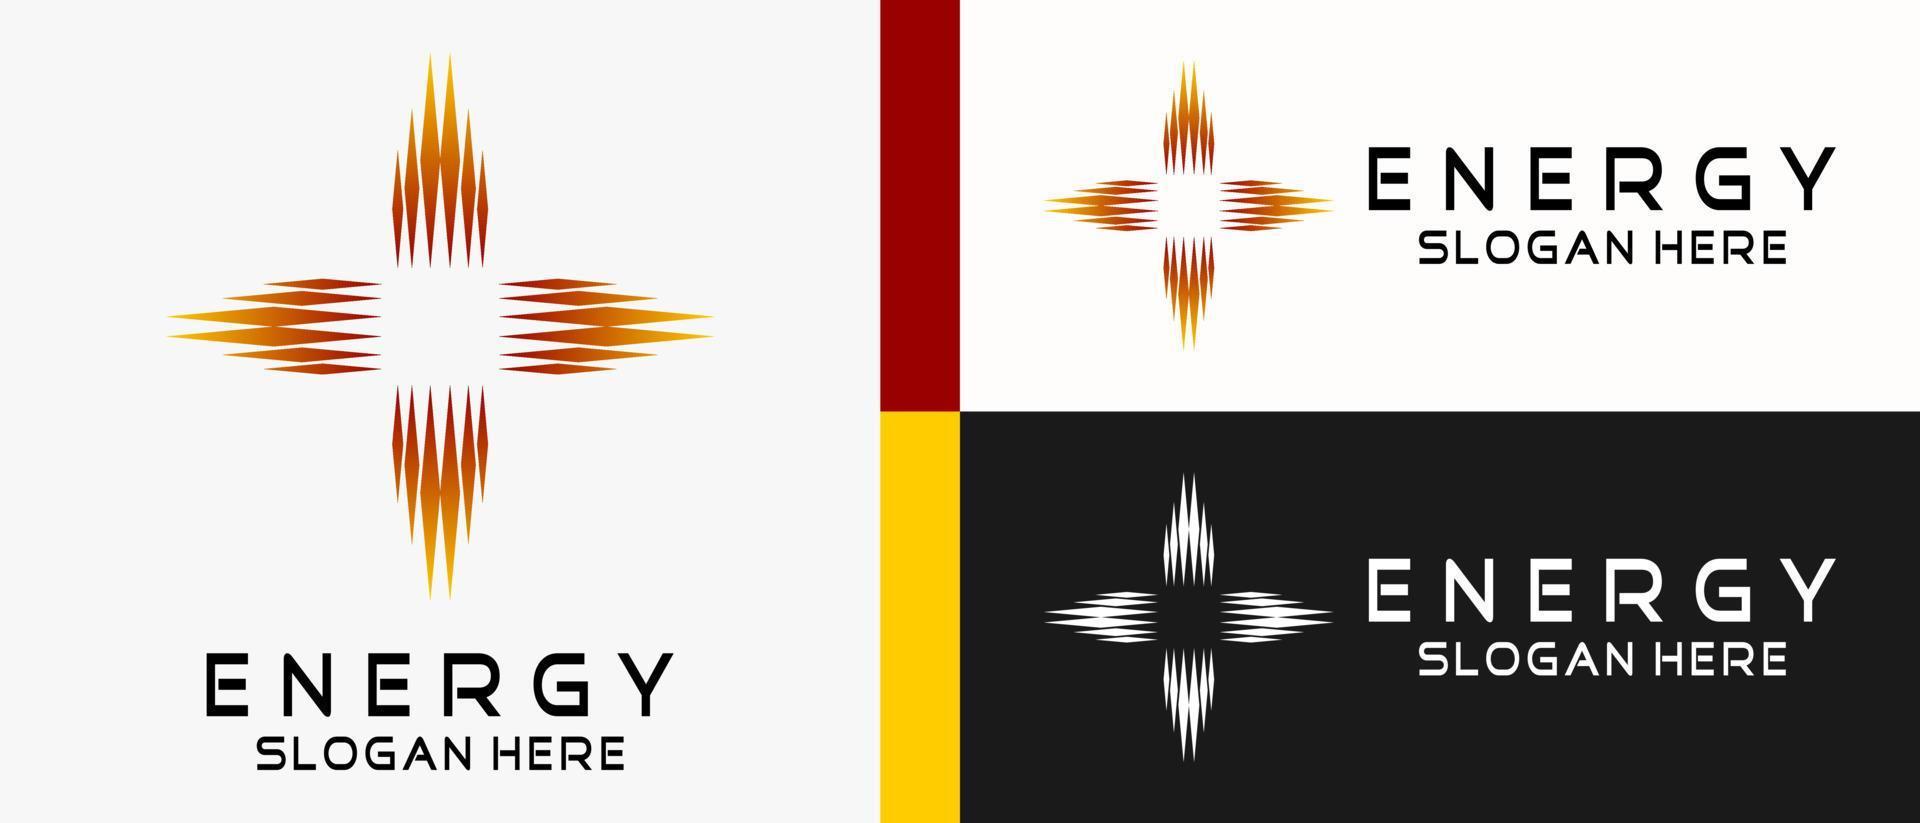 energy logo design template with creative abstract concept of star rays shape. premium vector logo illustration